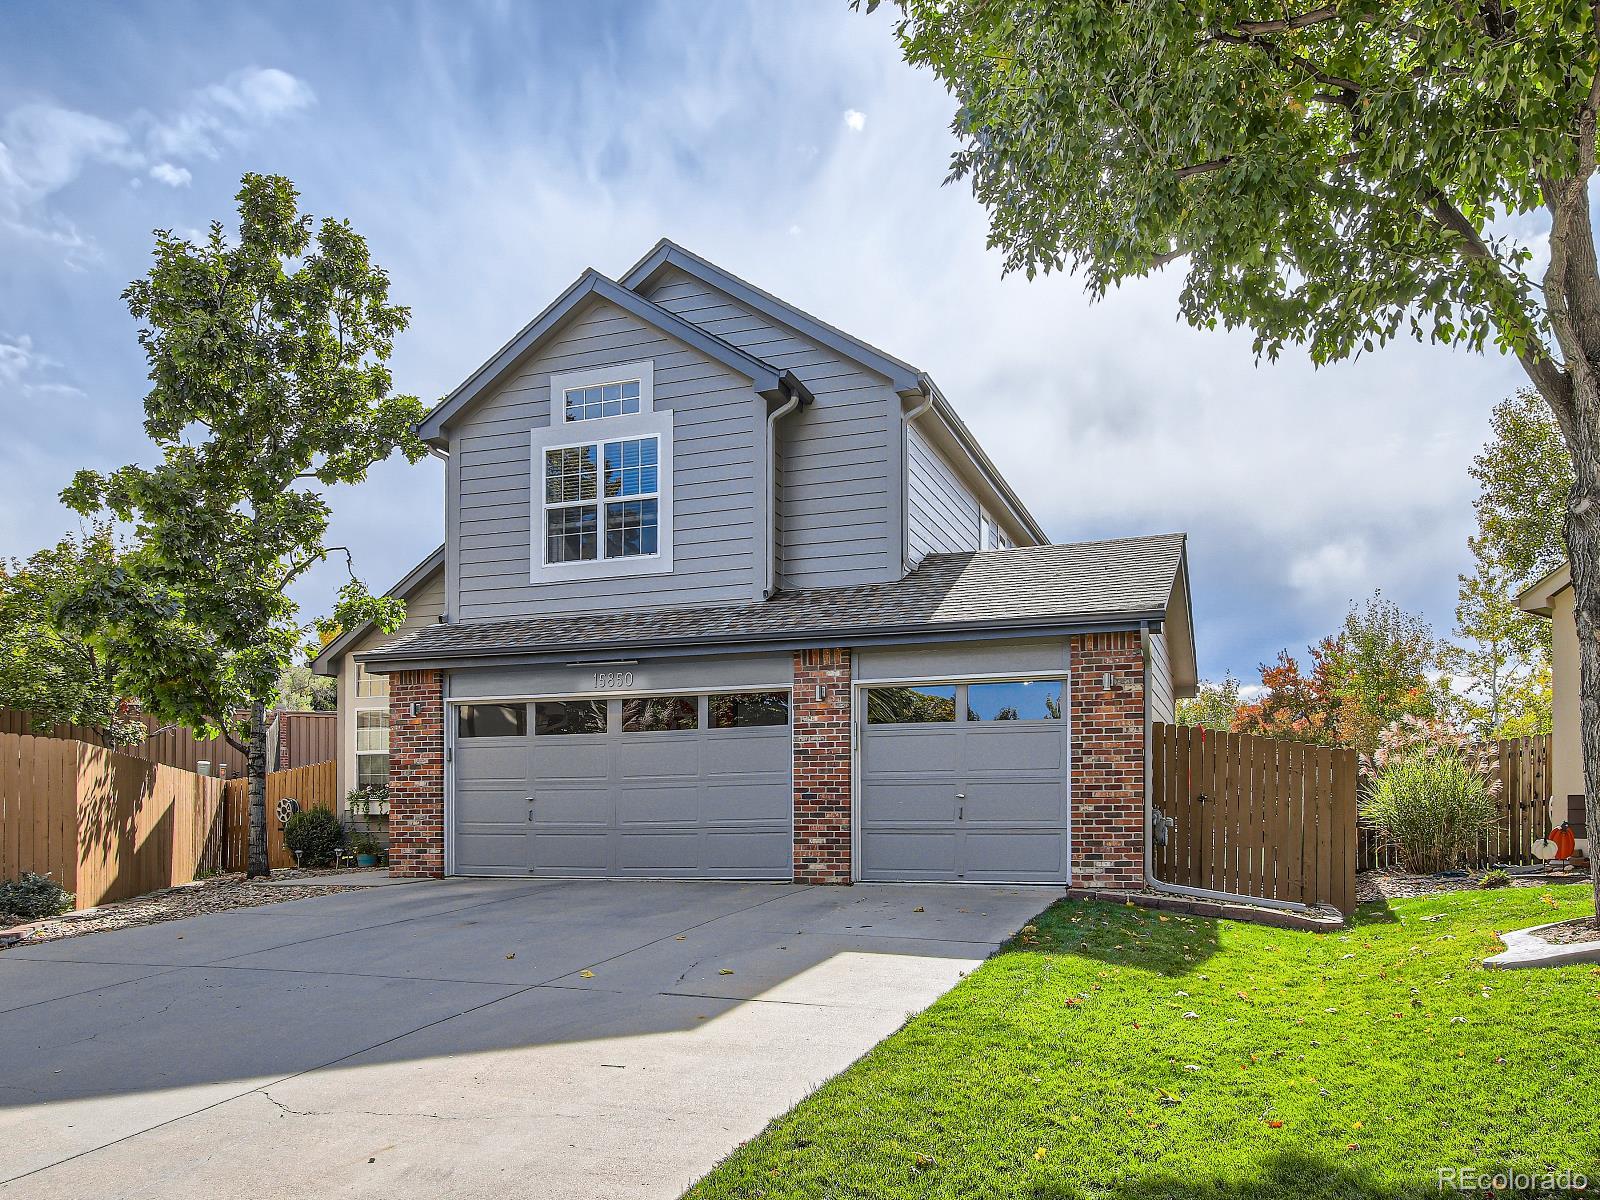 15850 W 64th Place, arvada MLS: 4494303 Beds: 3 Baths: 3 Price: $825,000